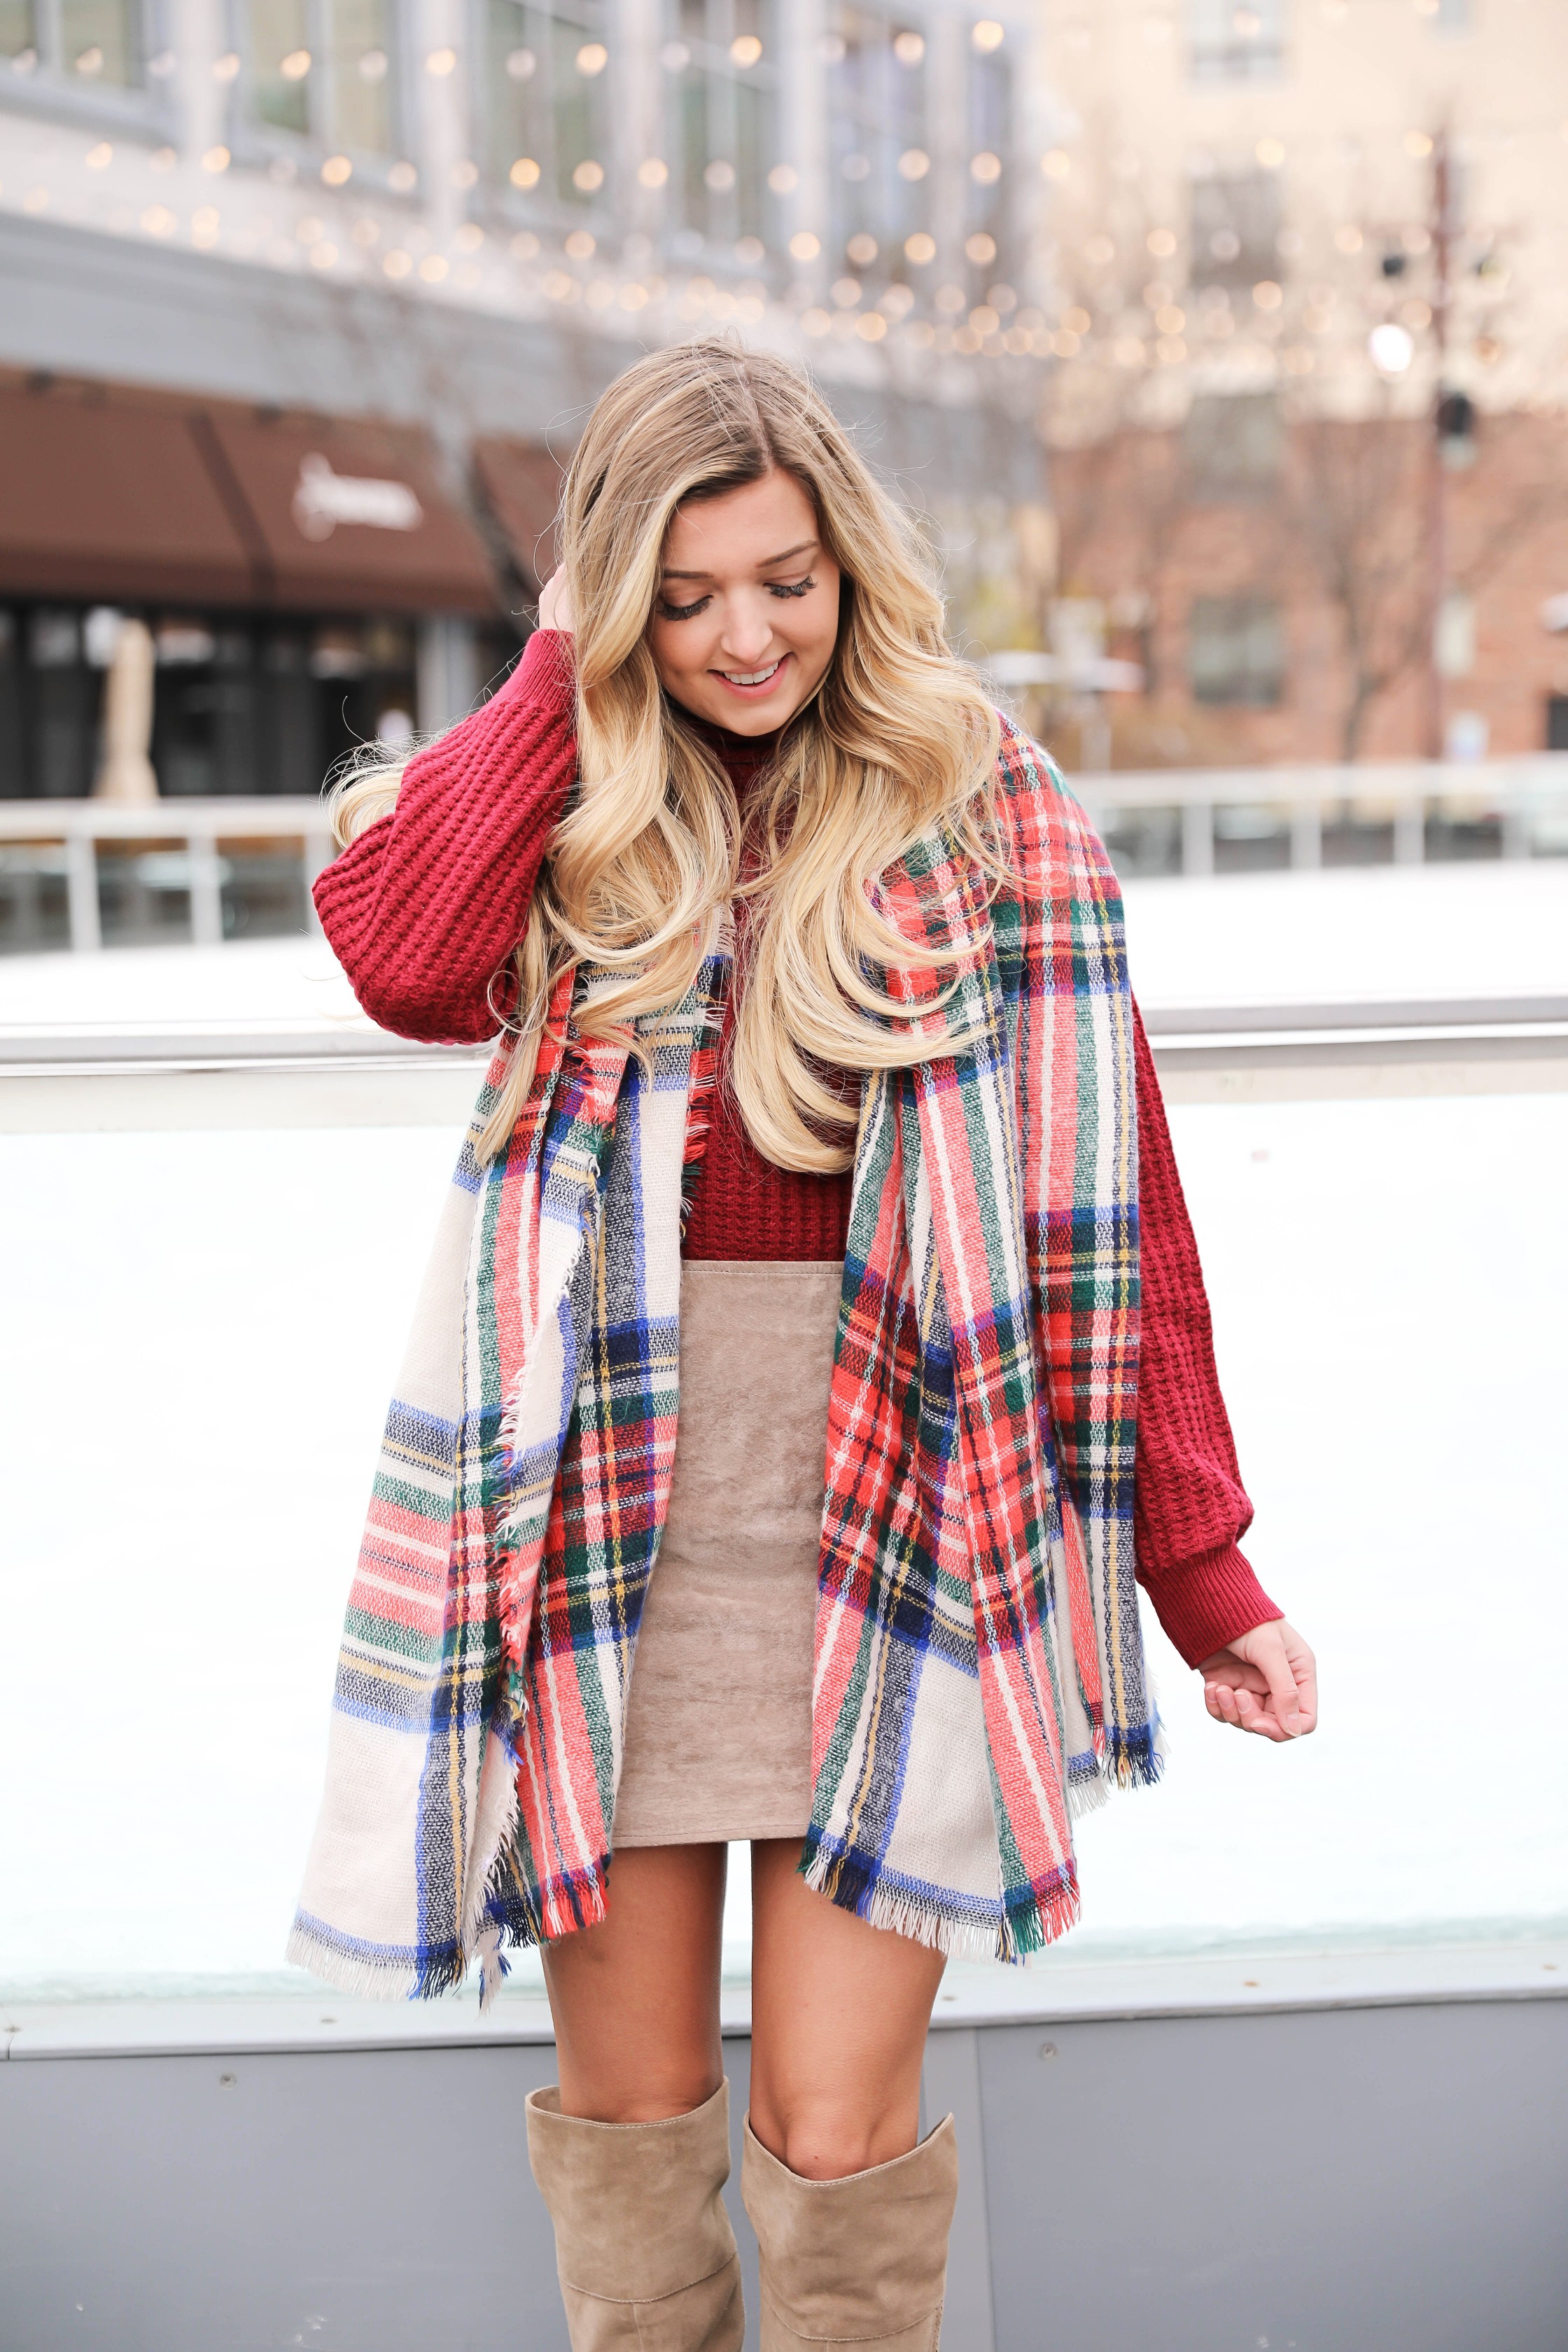 Red turtleneck sweater paired with my favorite suede skirt and Vince Camuto over the knee boots! This holiday look looks so cute with this red and green plaid scarf! The cutest winter outfit on the fashion blog daily dose of charm by lauren lindmark